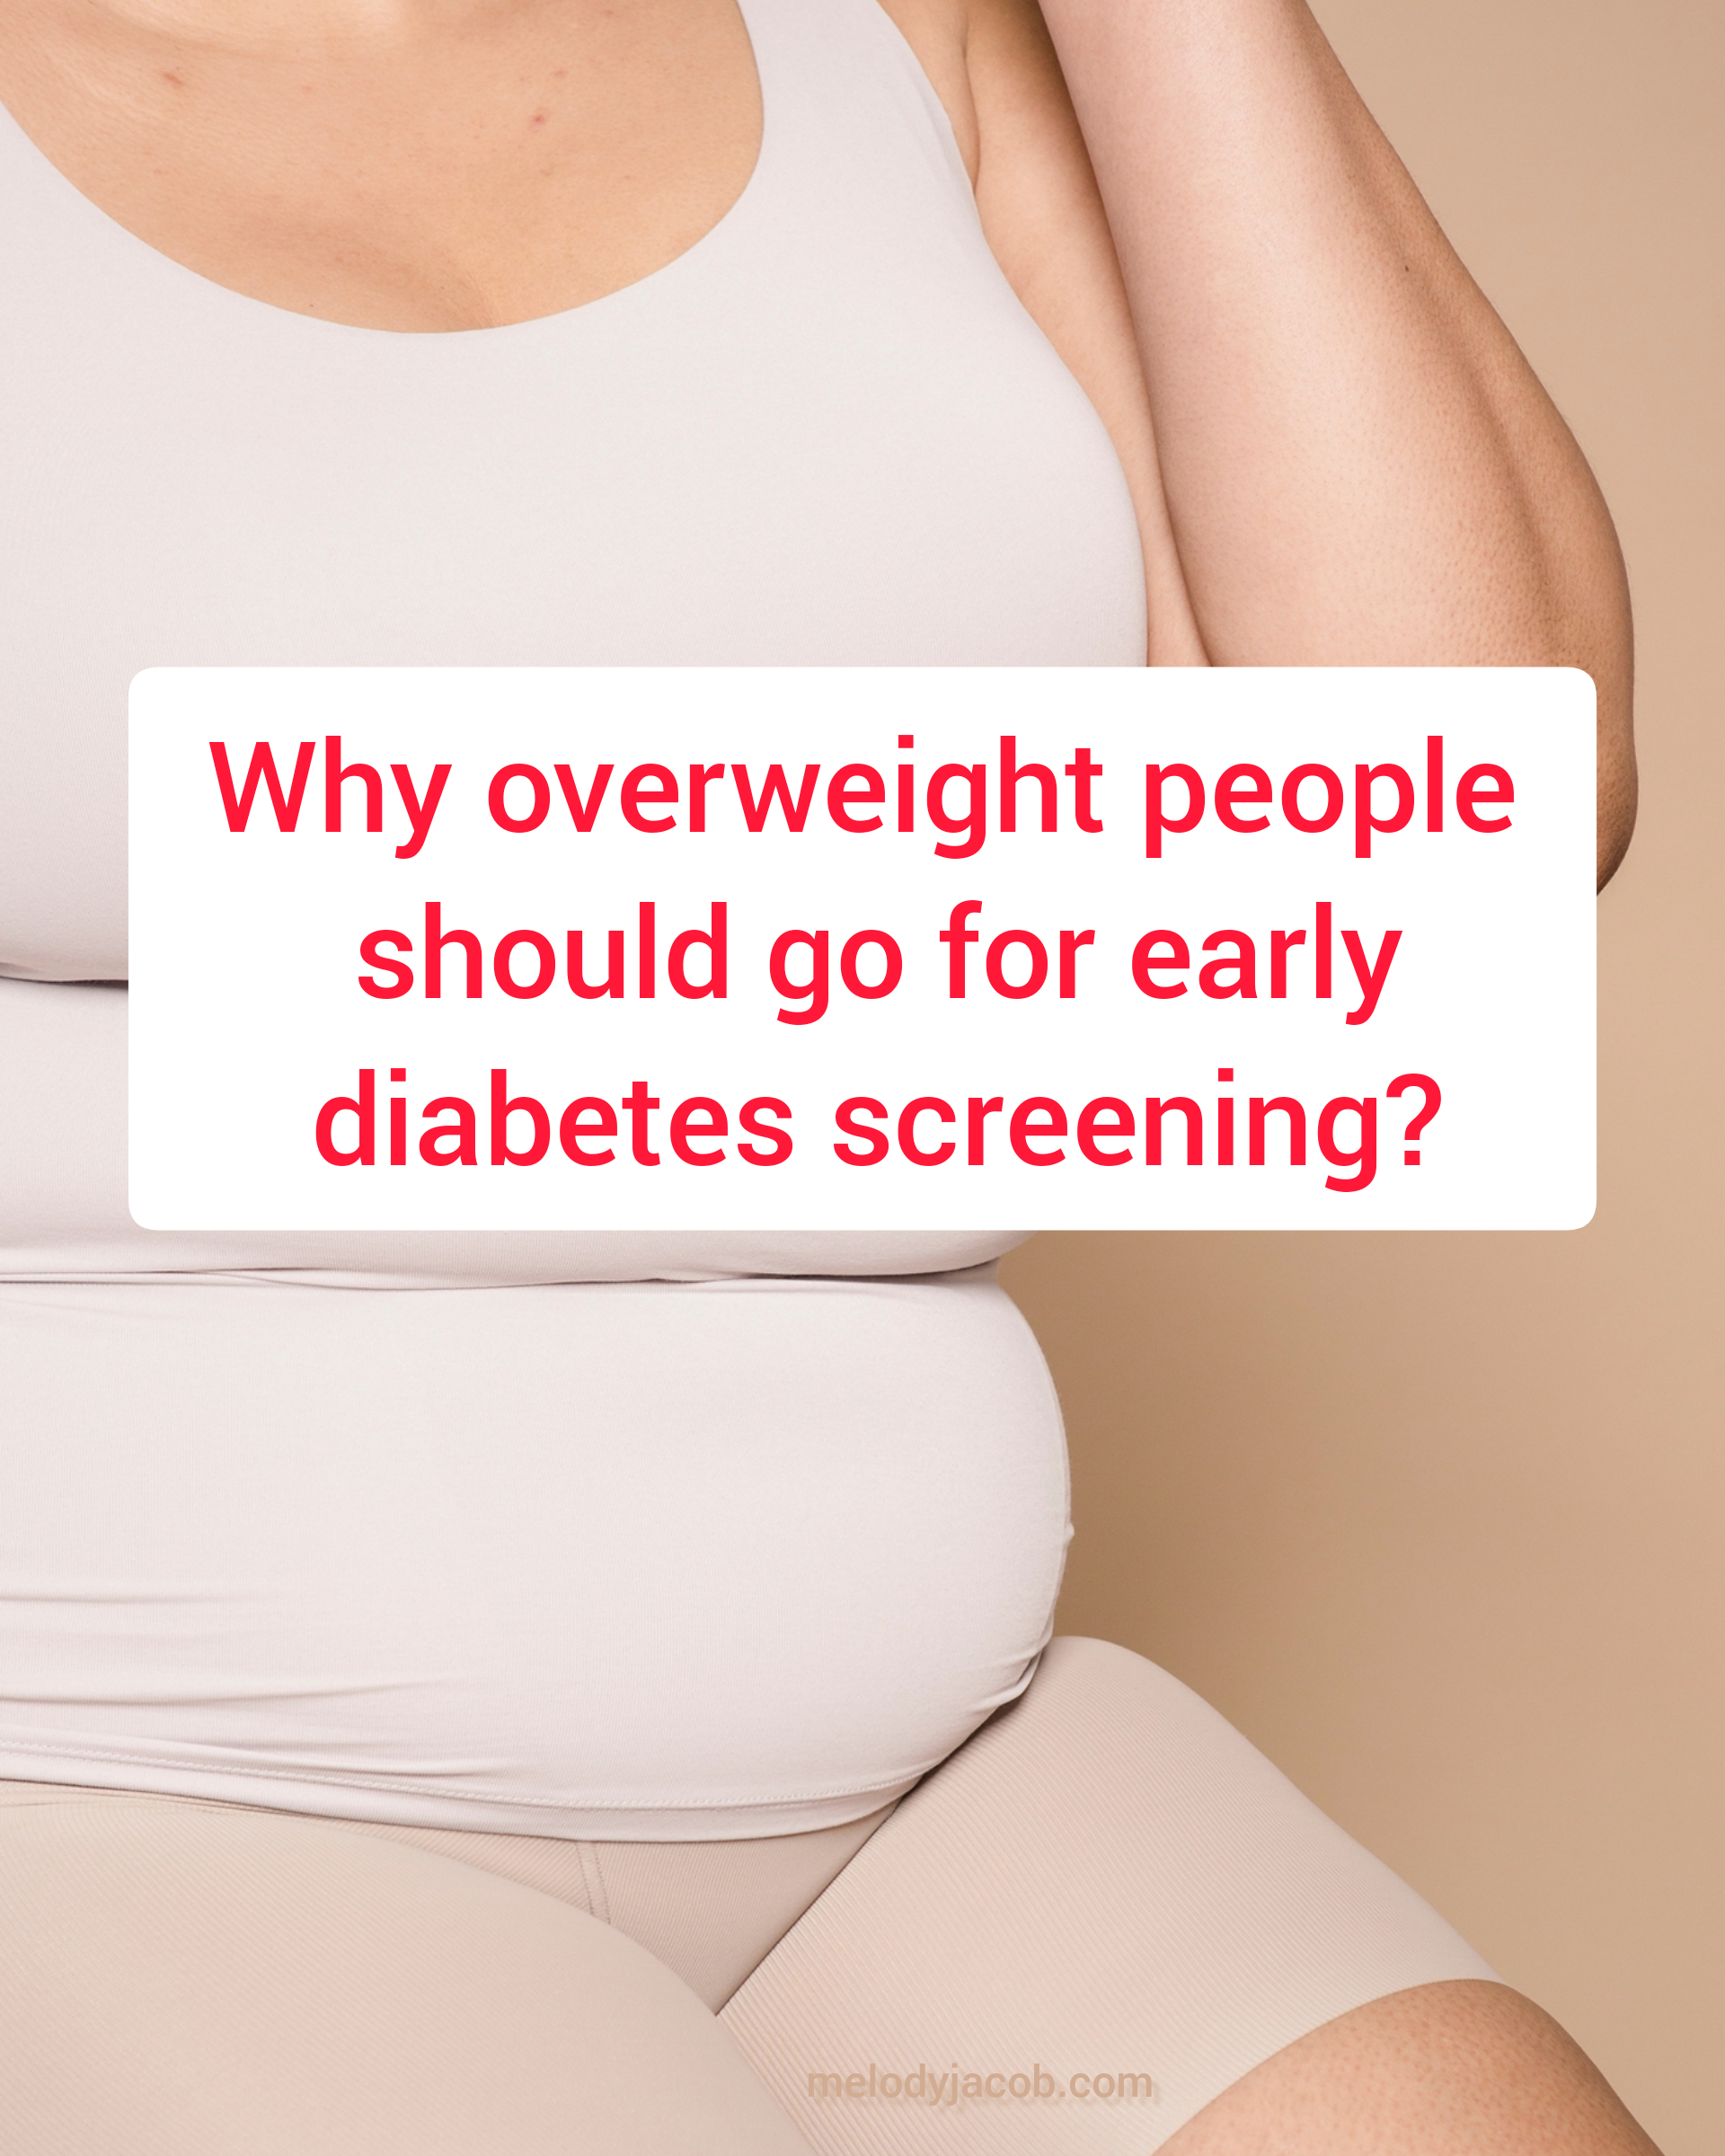 Why overweight people should get screened for diabetes early.